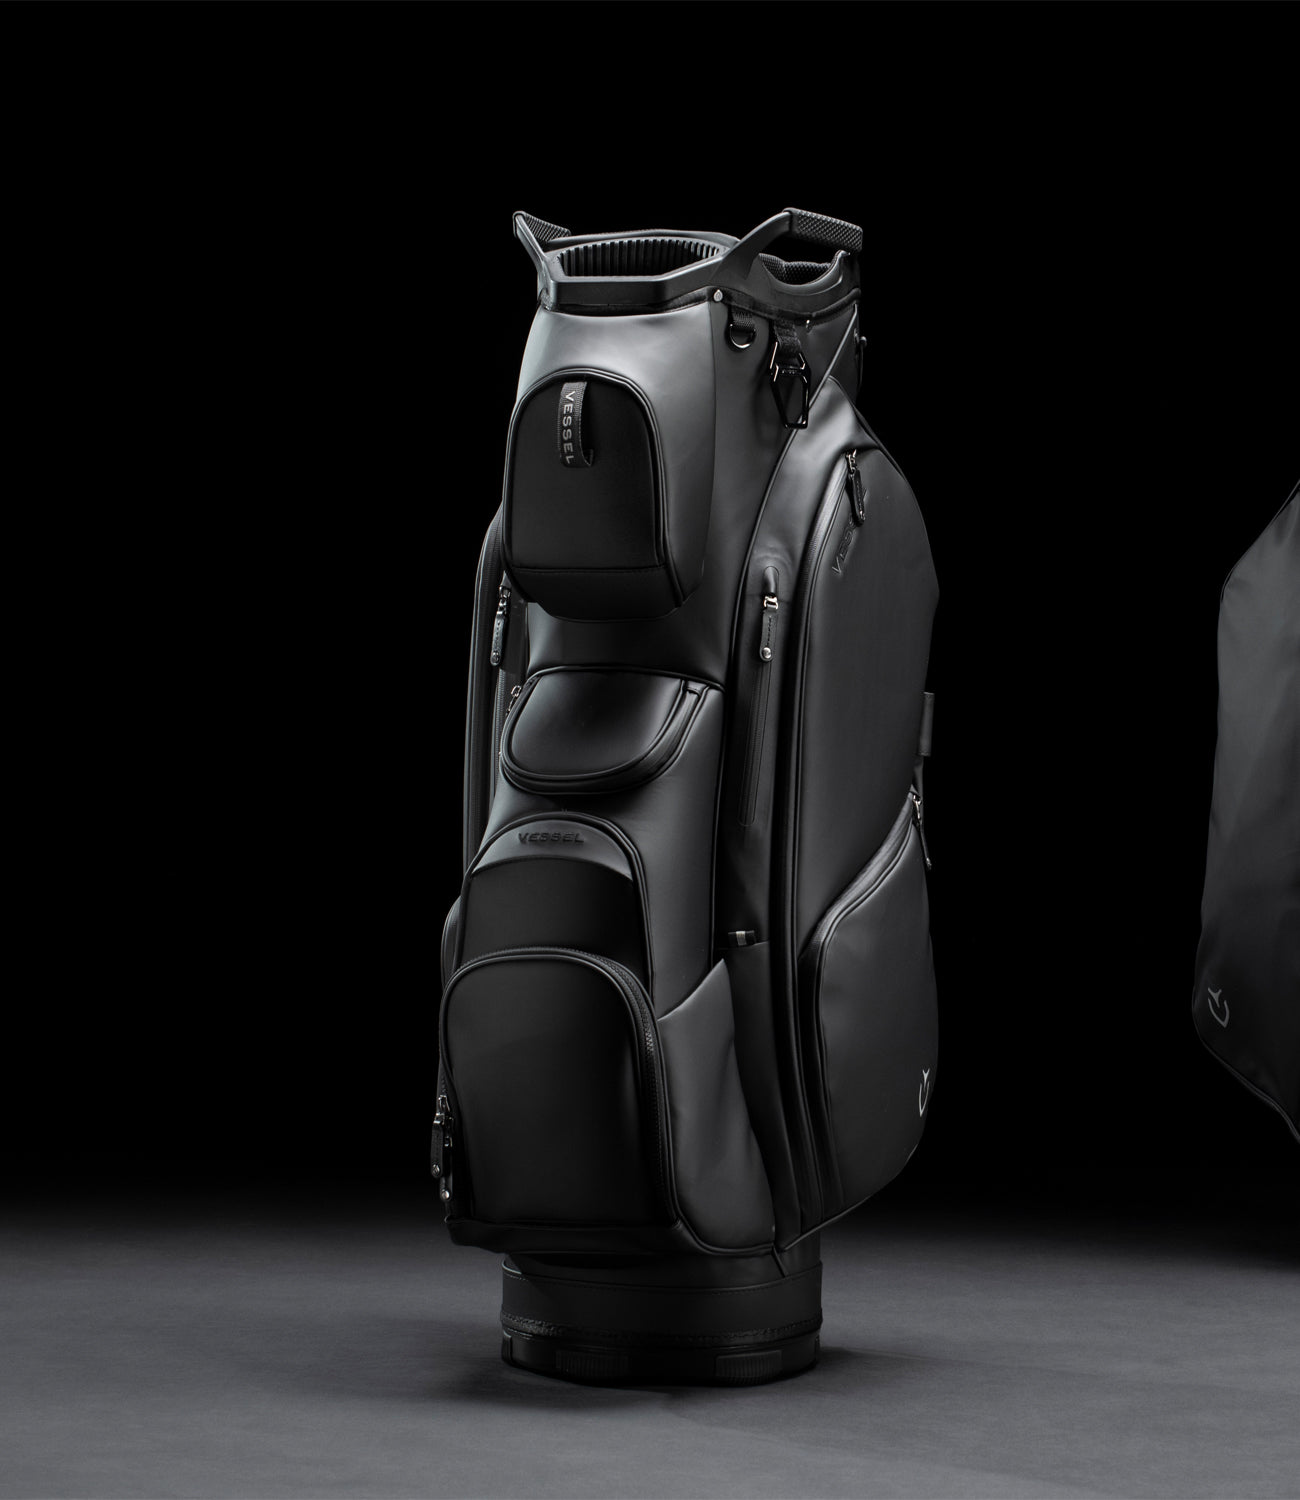 Vessel Crafts Luxury Golf Bags With Tour Performance